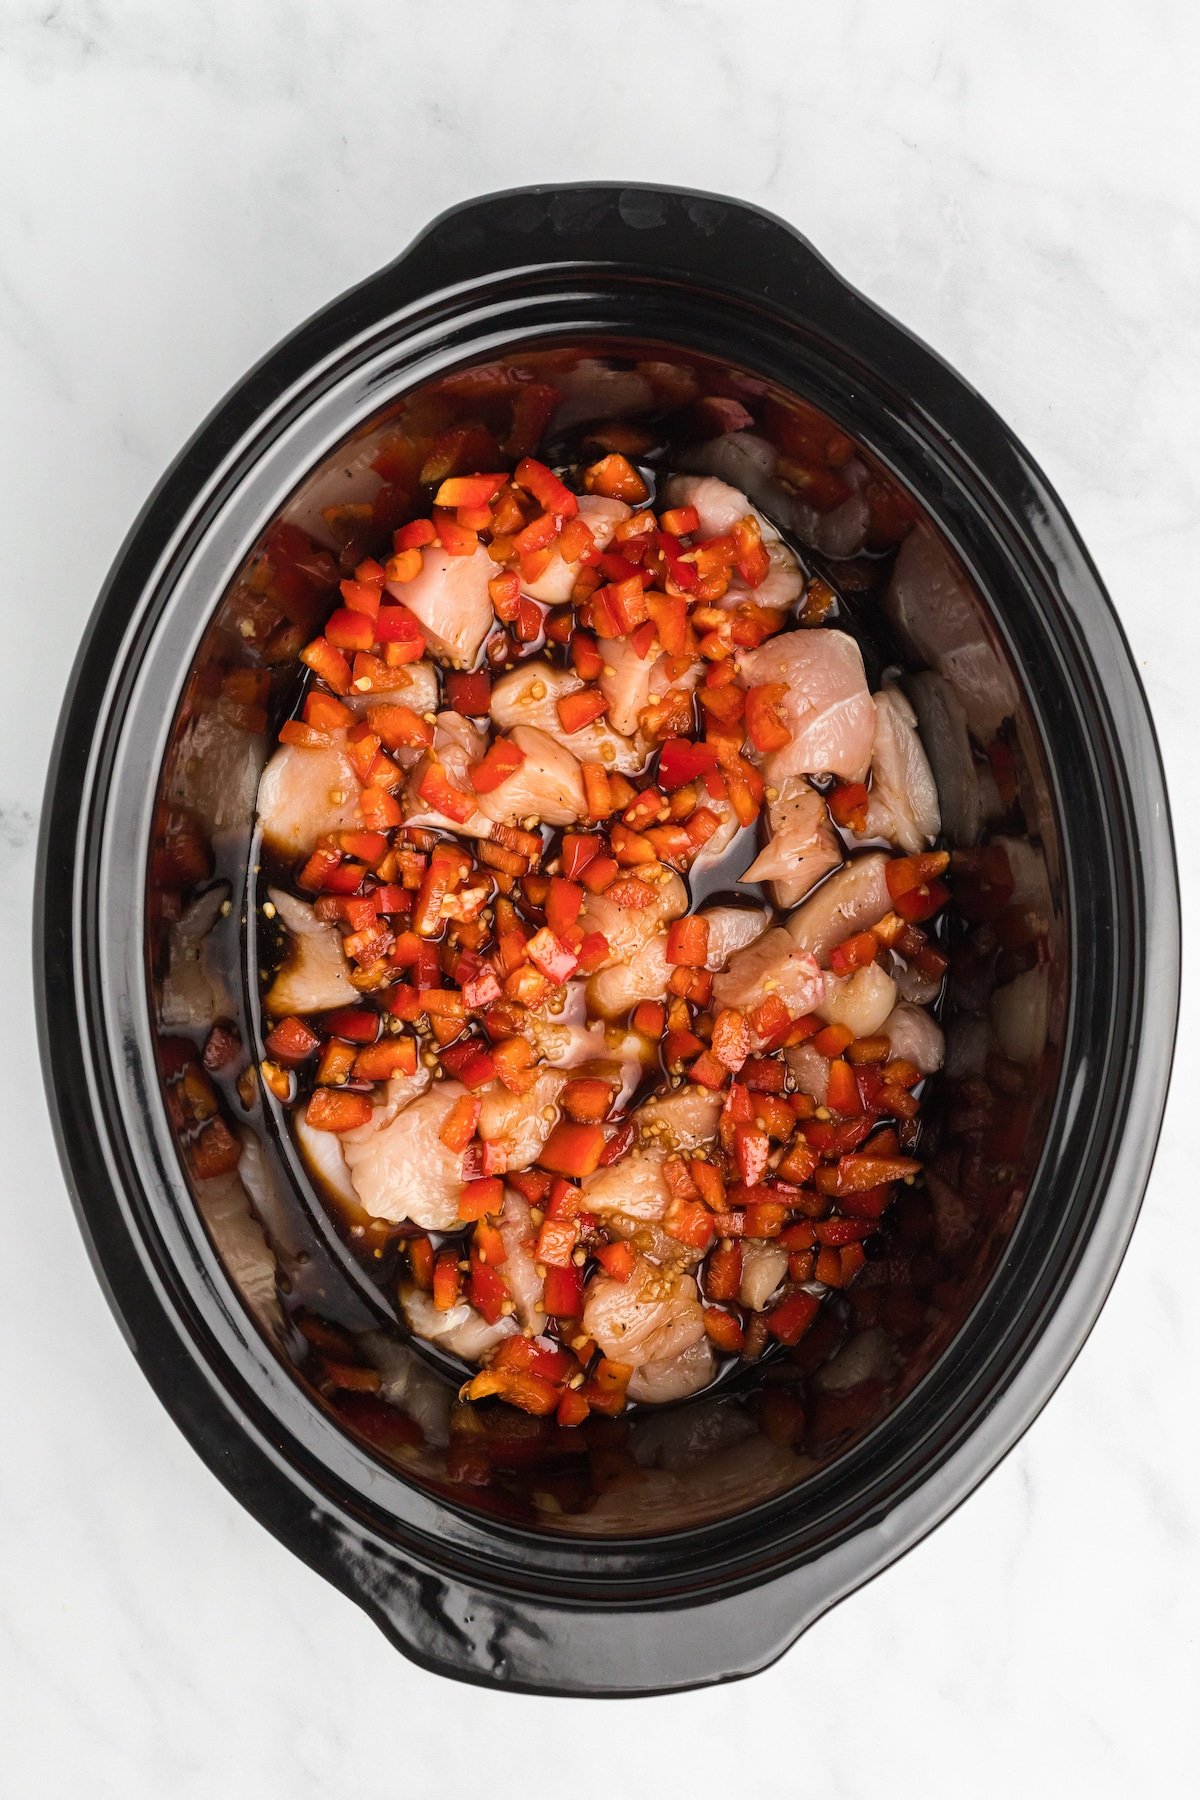 Chunks of chicken breast topped with teriyaki sauce in the slow cooker